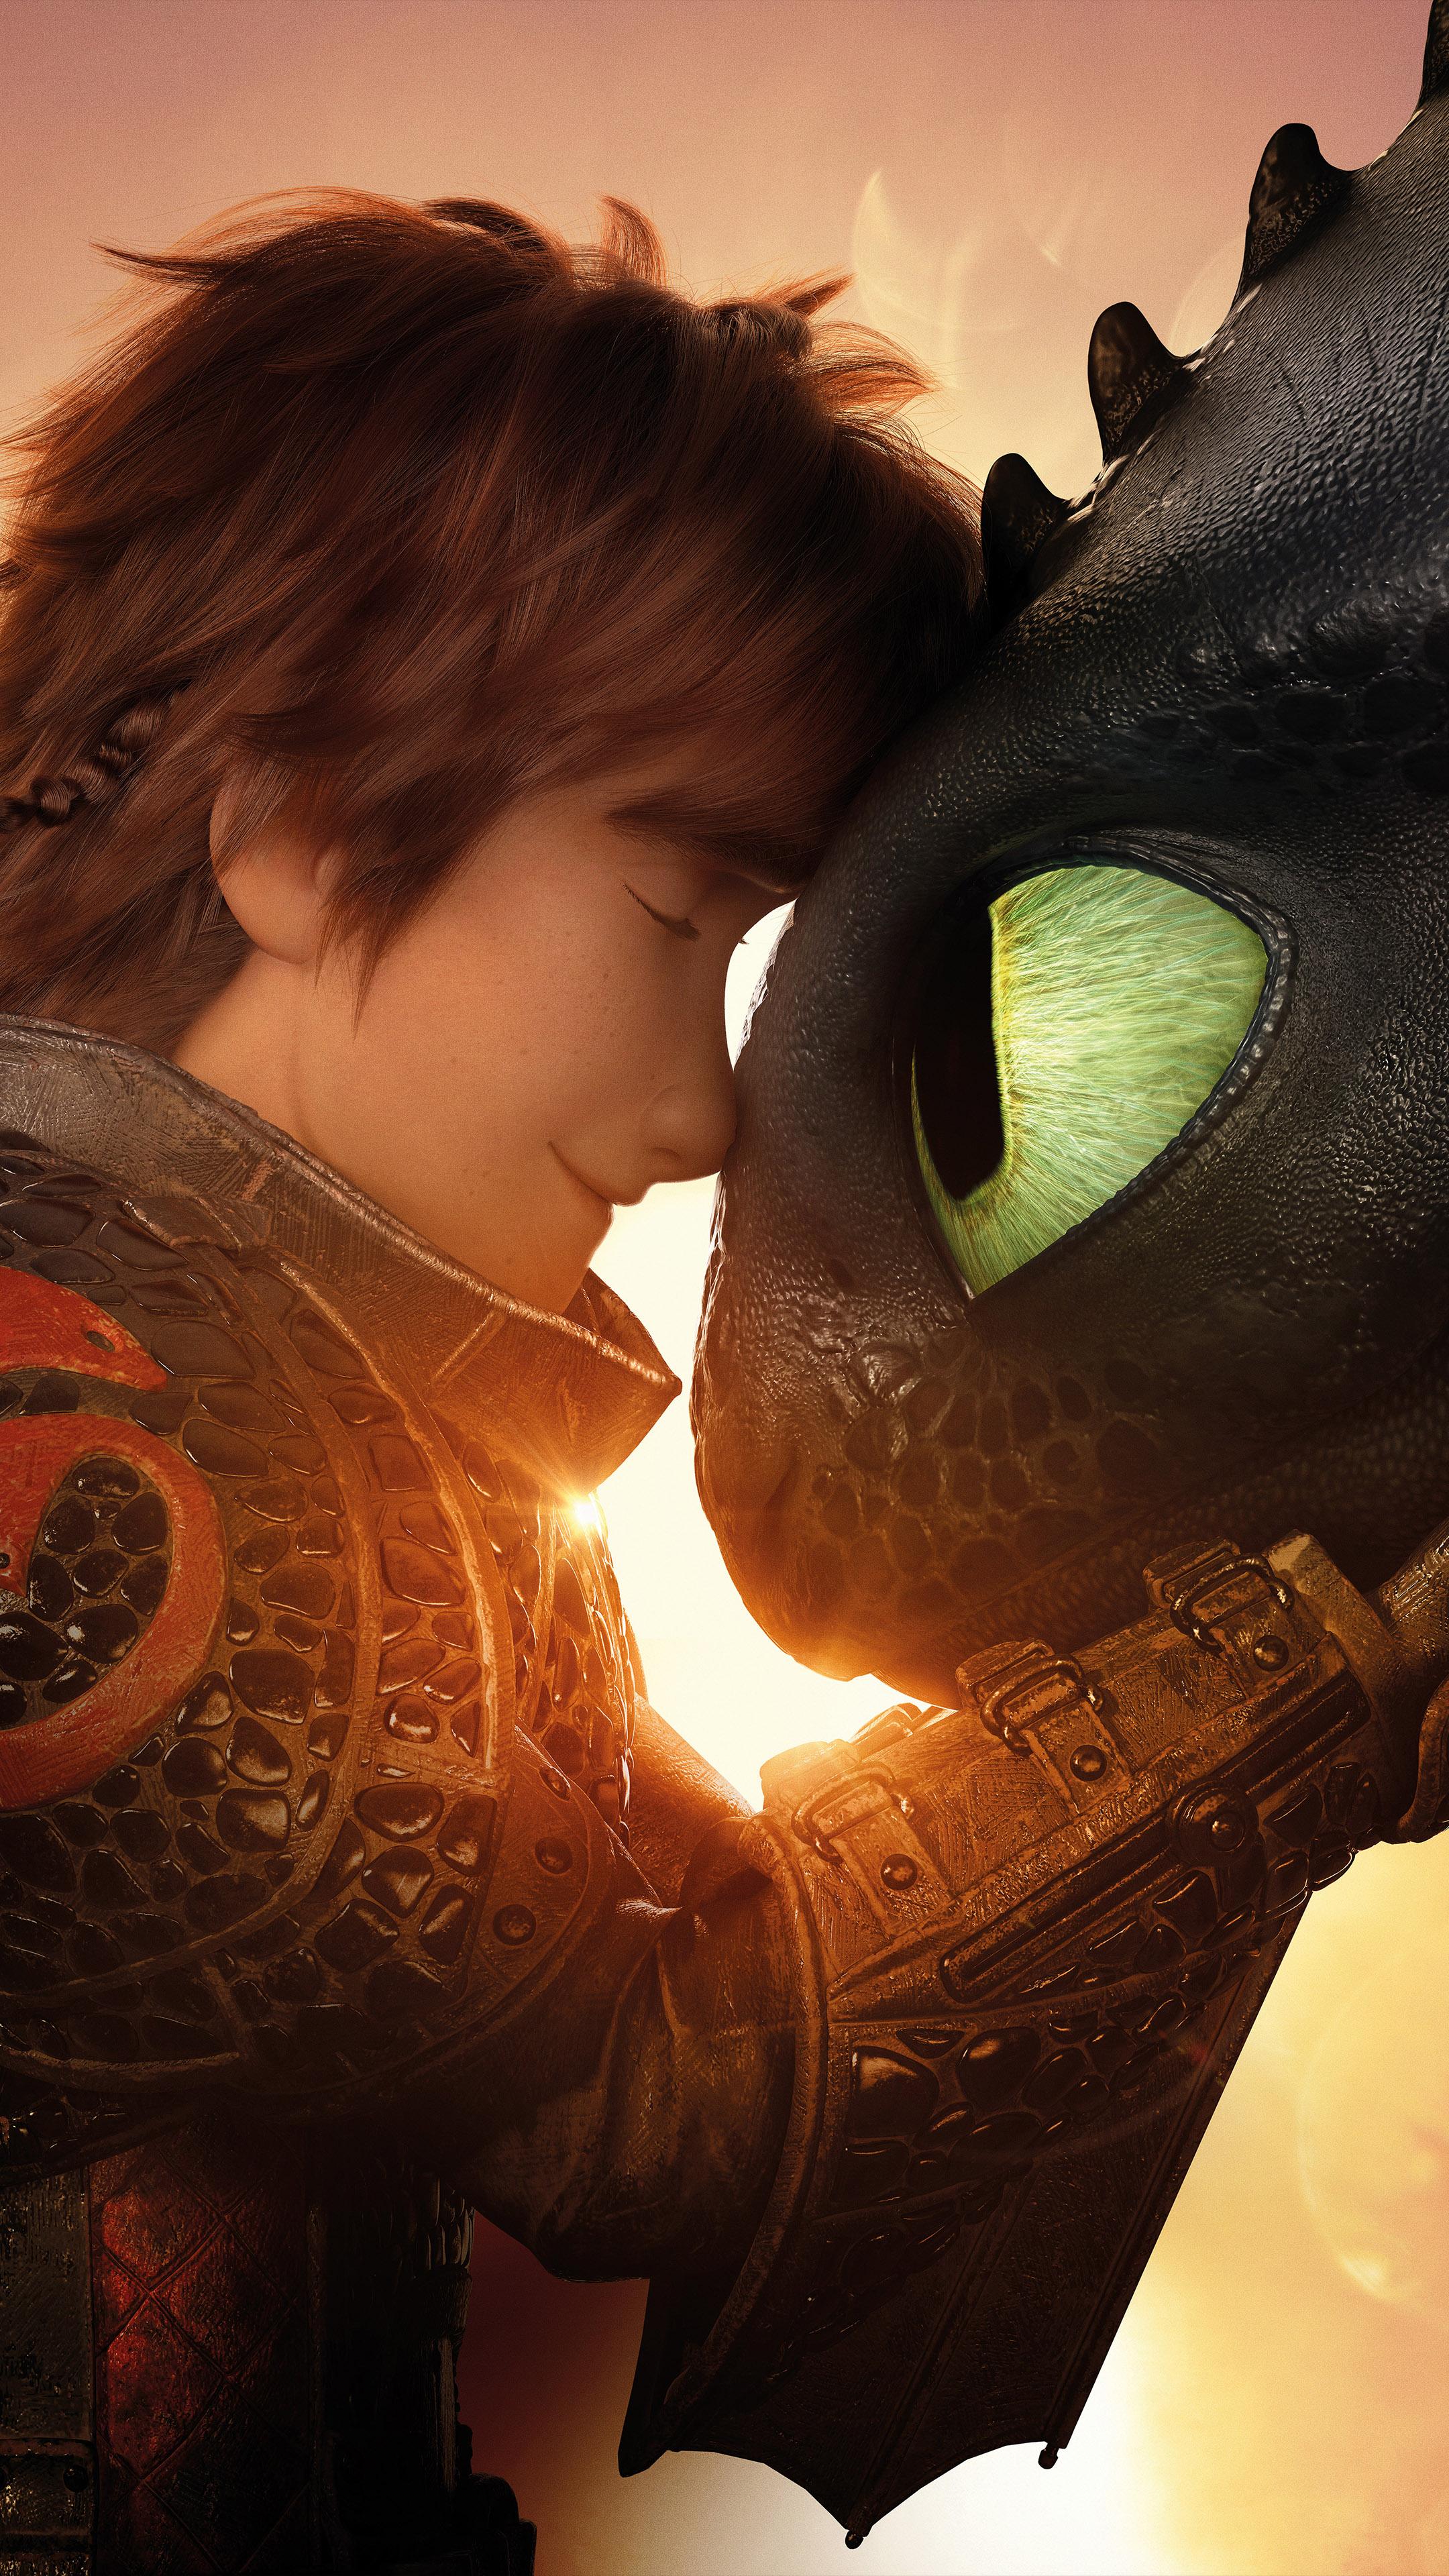 Hiccup Night Fury Toothless How To Train Your Dragon 3 Free